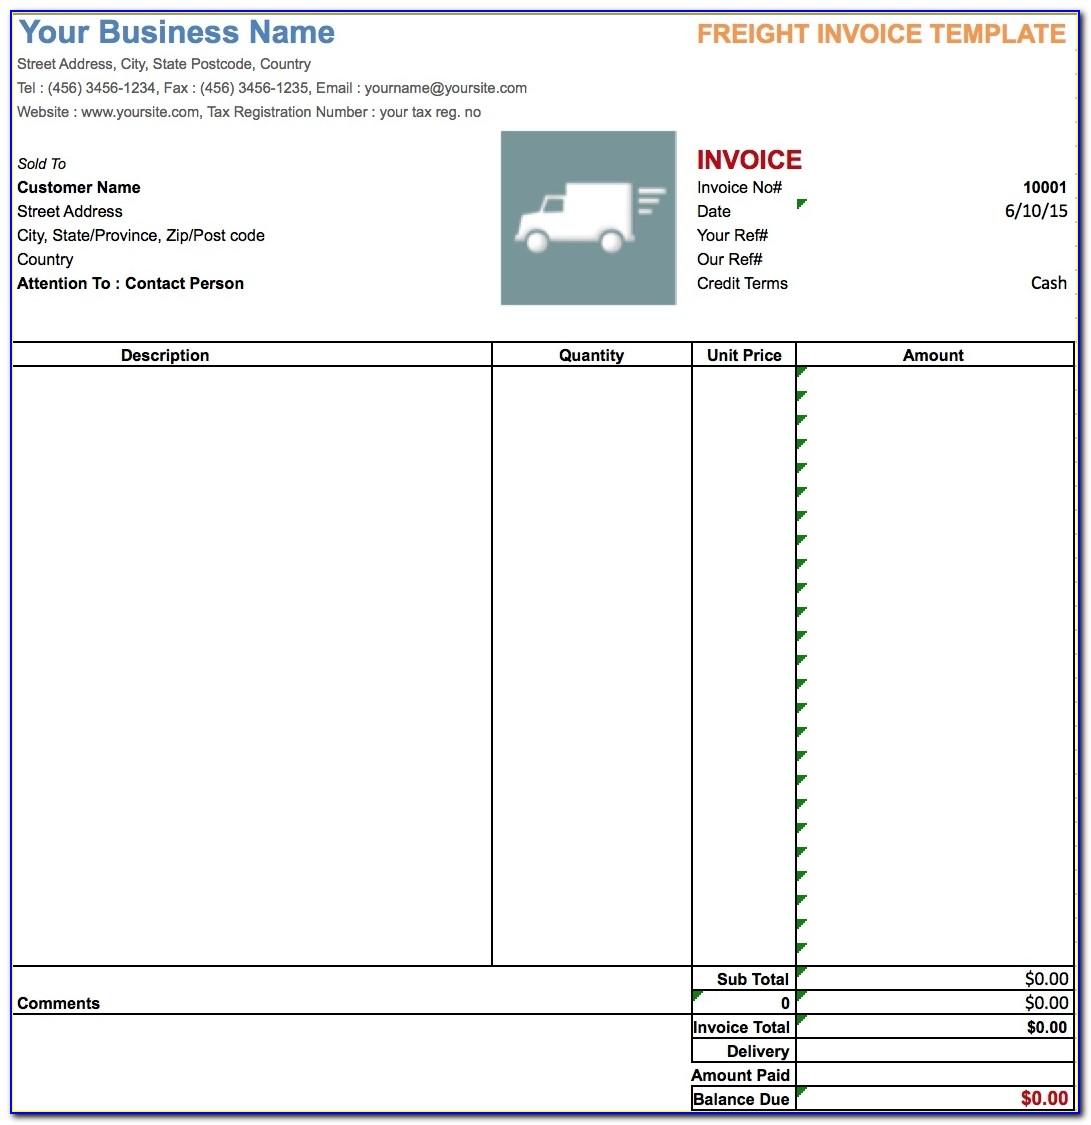 Invoice Tracking Template Free